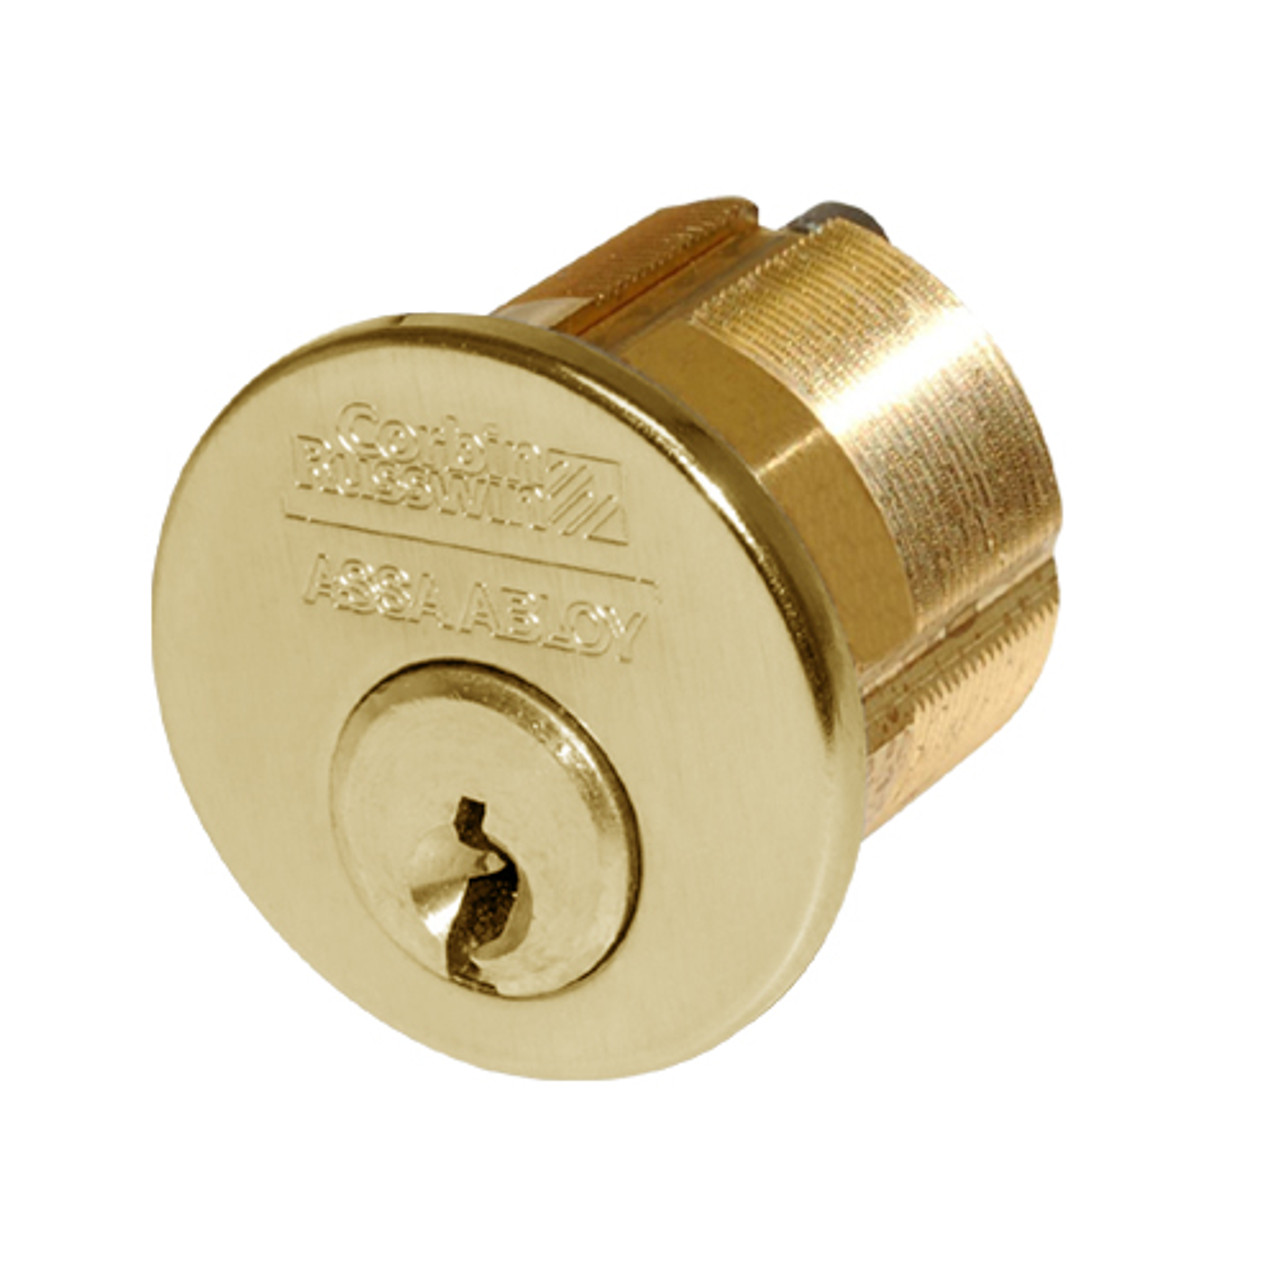 CR1000-114-A01-6-A1-605 Corbin Conventional Mortise Cylinder for Mortise Lock and DL3000 Deadlocks with Cloverleaf Cam in Bright Brass Finish